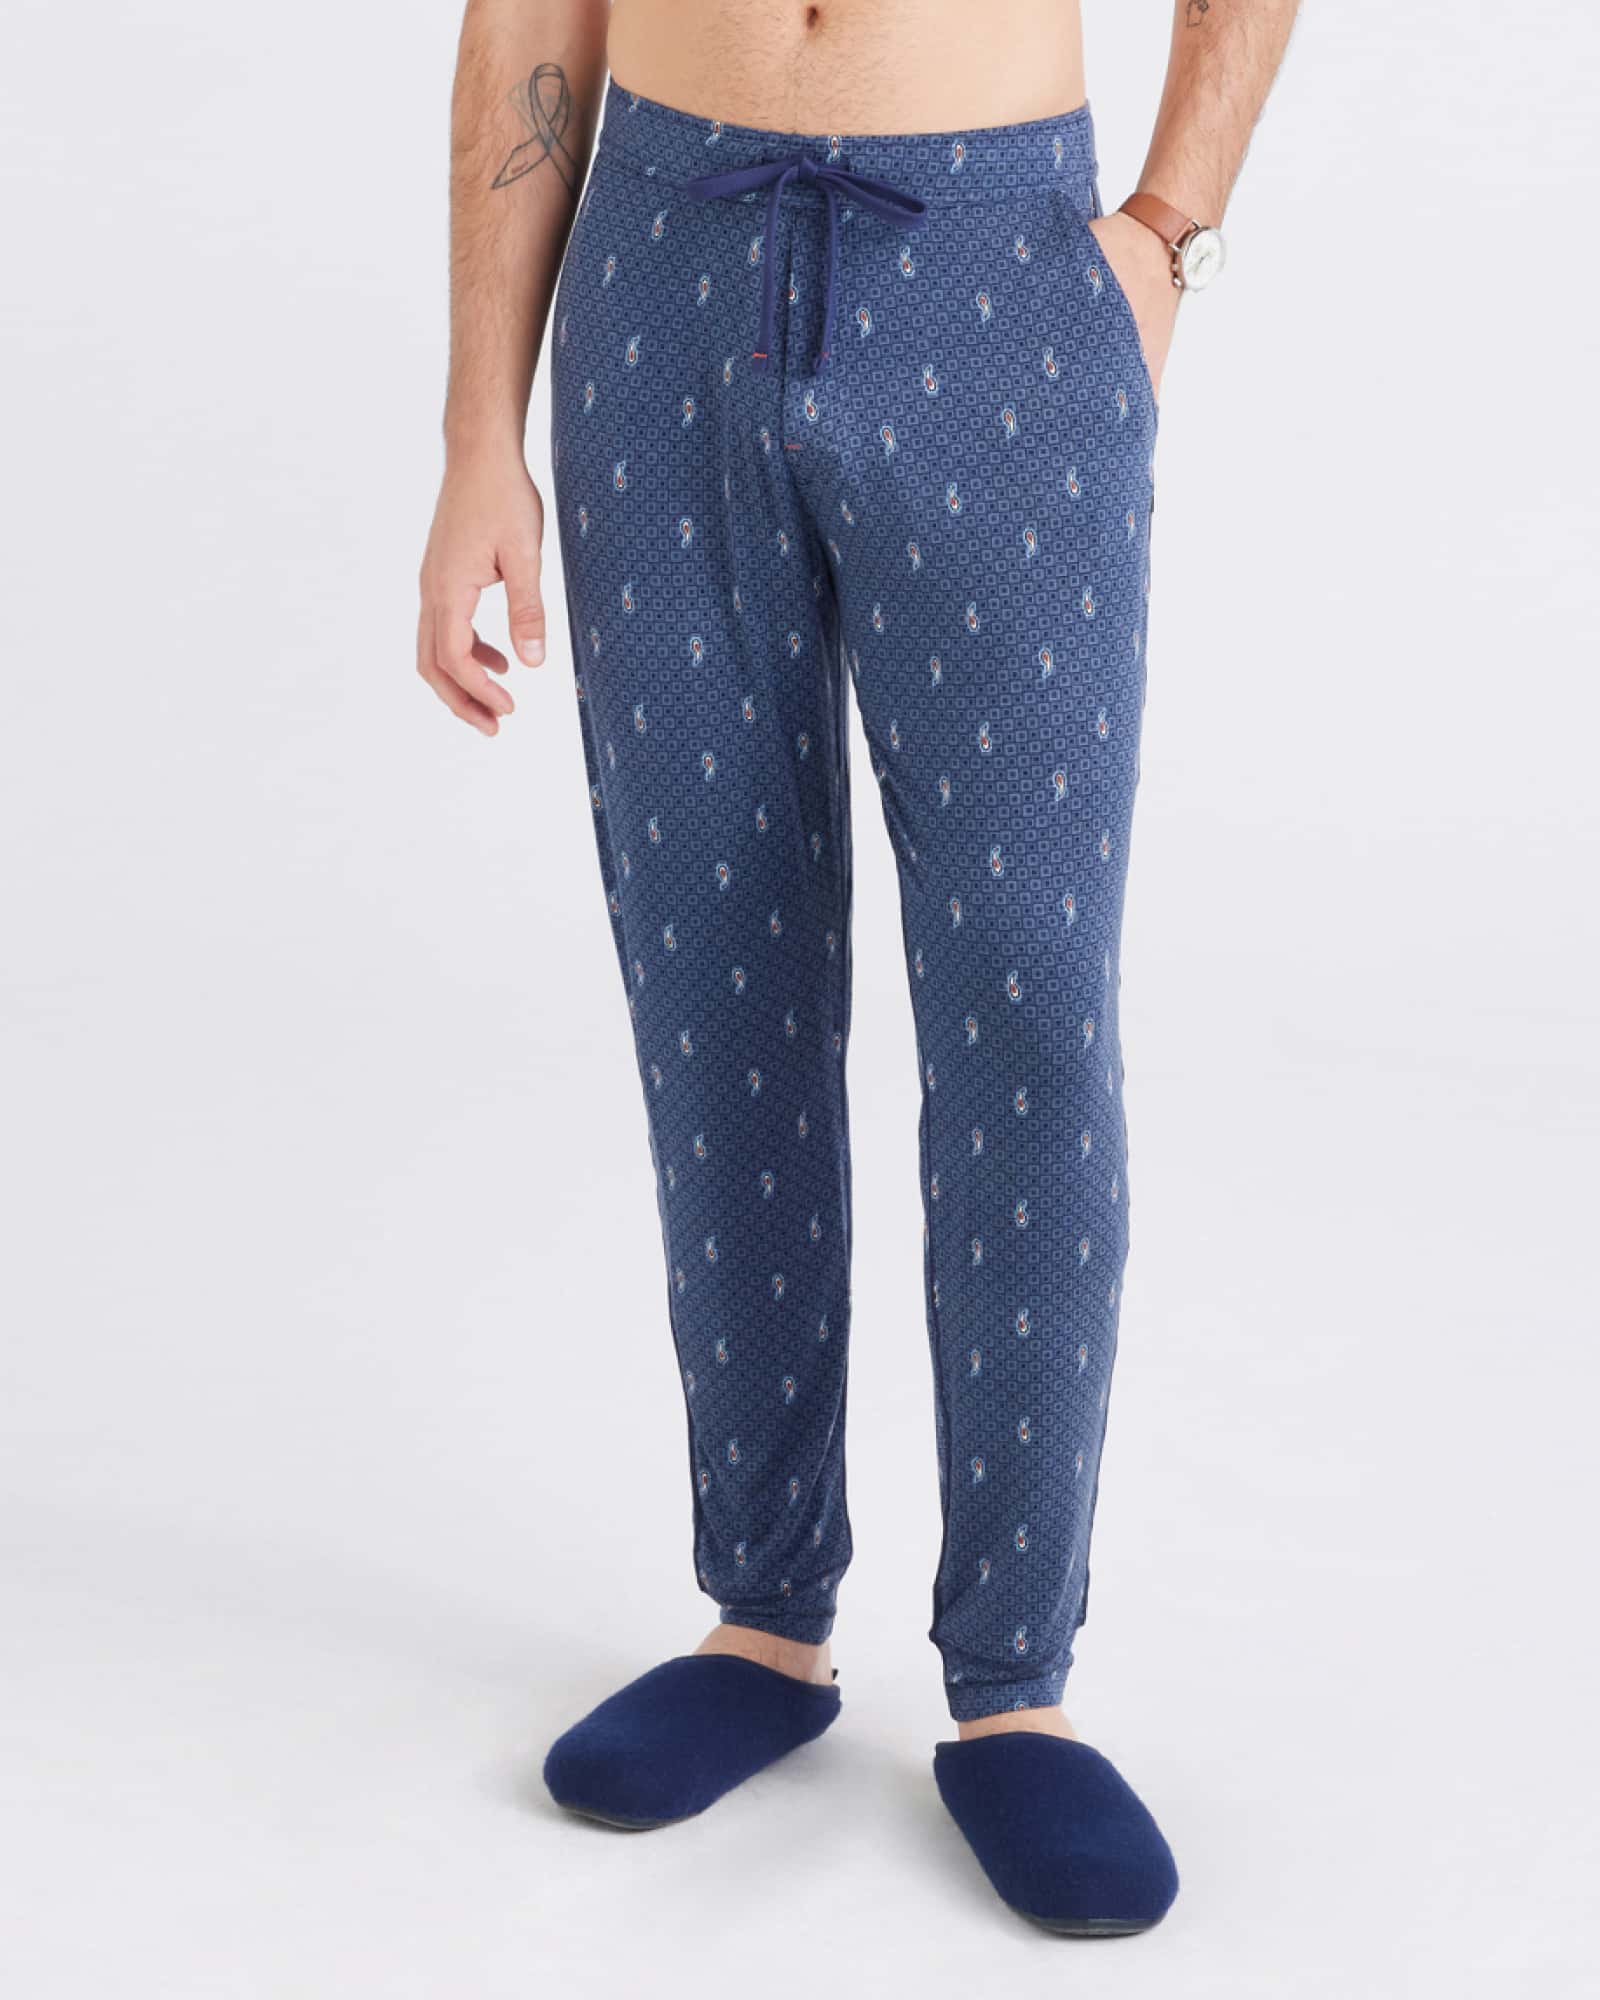 Front - Model wearing  Snooze Sleep Pant in Paisley Tiles-Turbulence